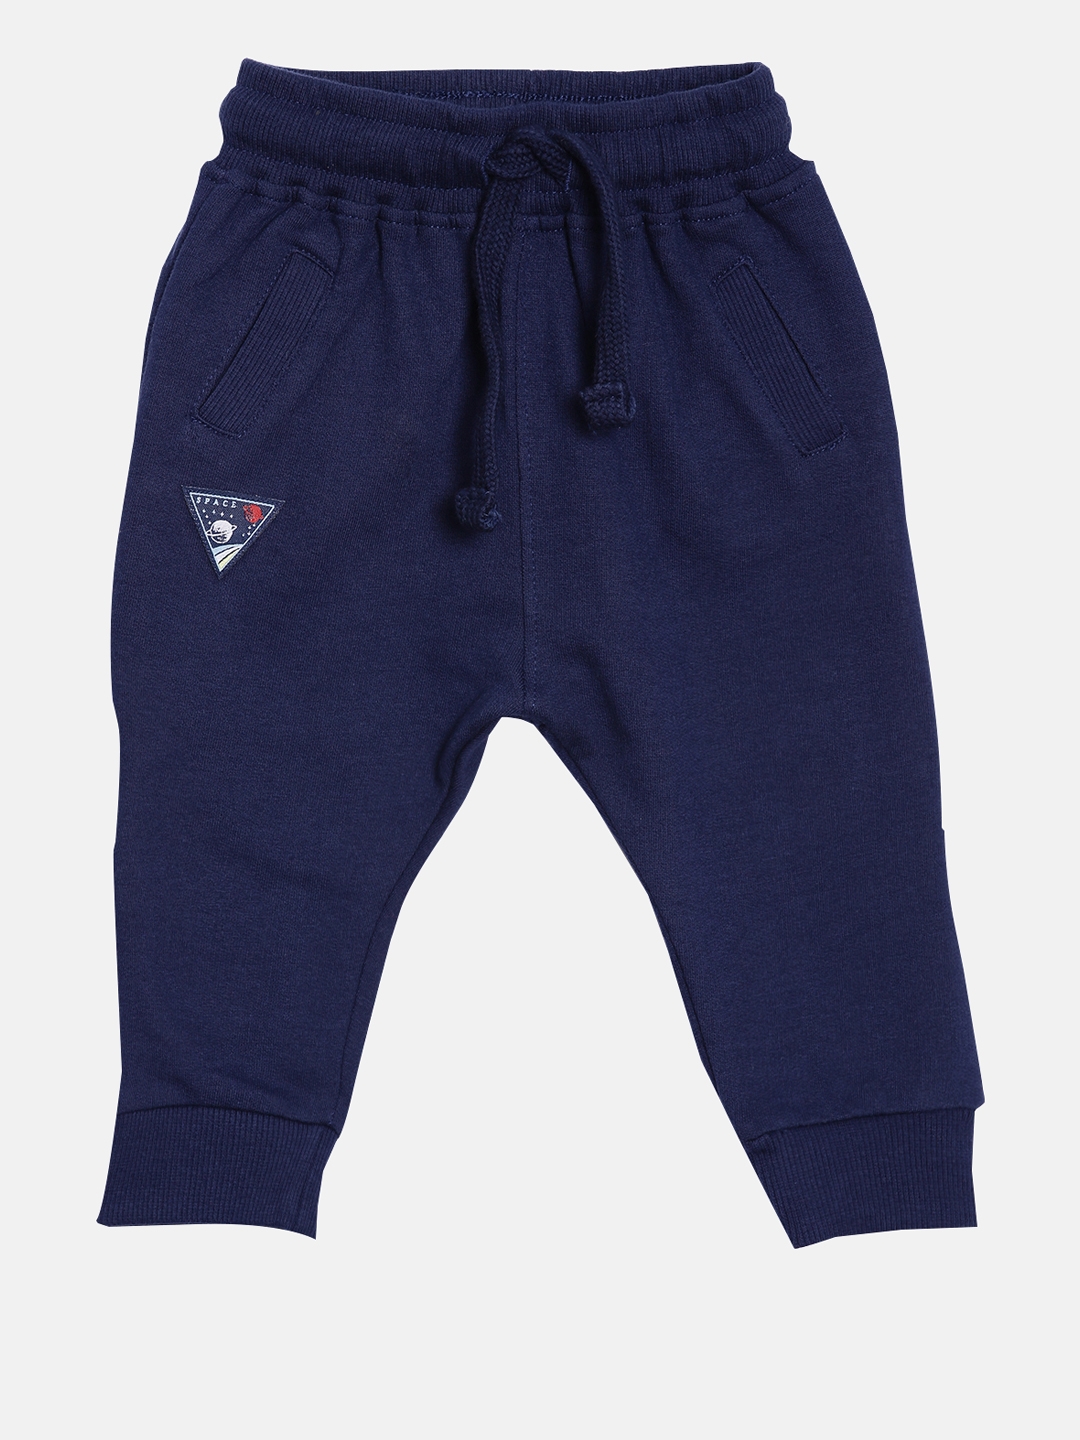 Nuberry | Nuberry Kids Joggers